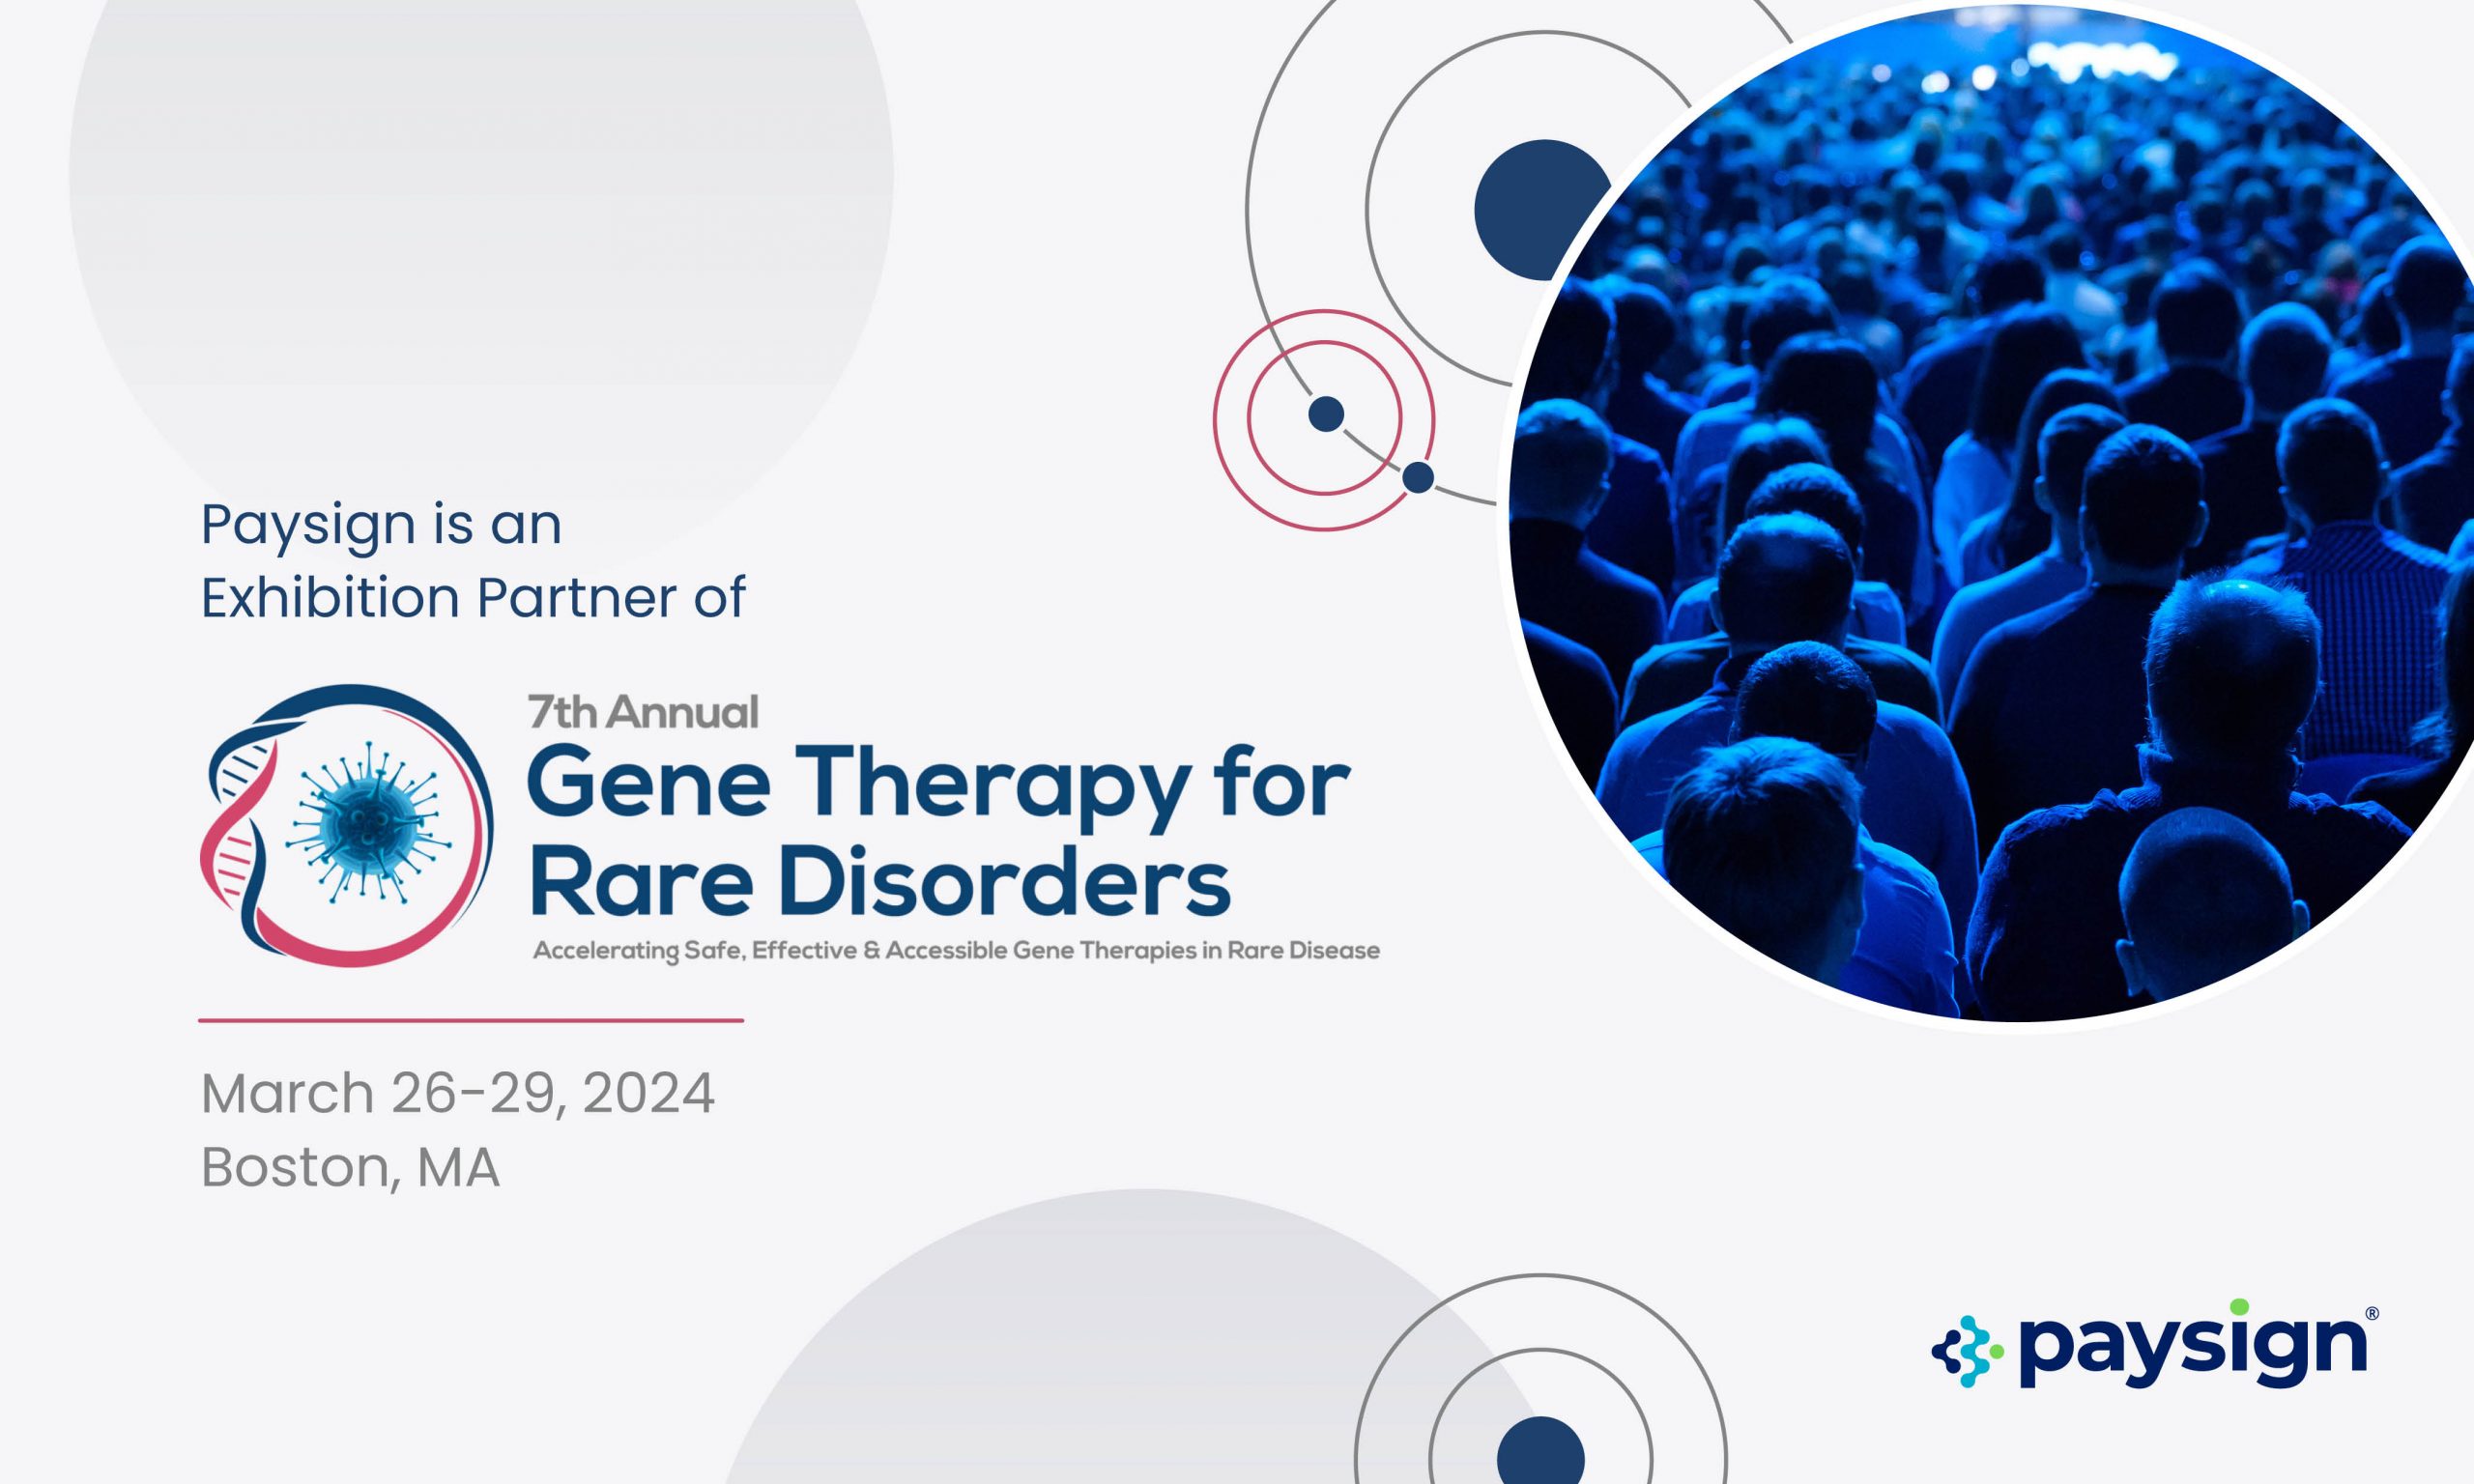 Paysign is an Exhibition Partner at 7th Annual Gene Therapy Summit, March 26-29, Boston